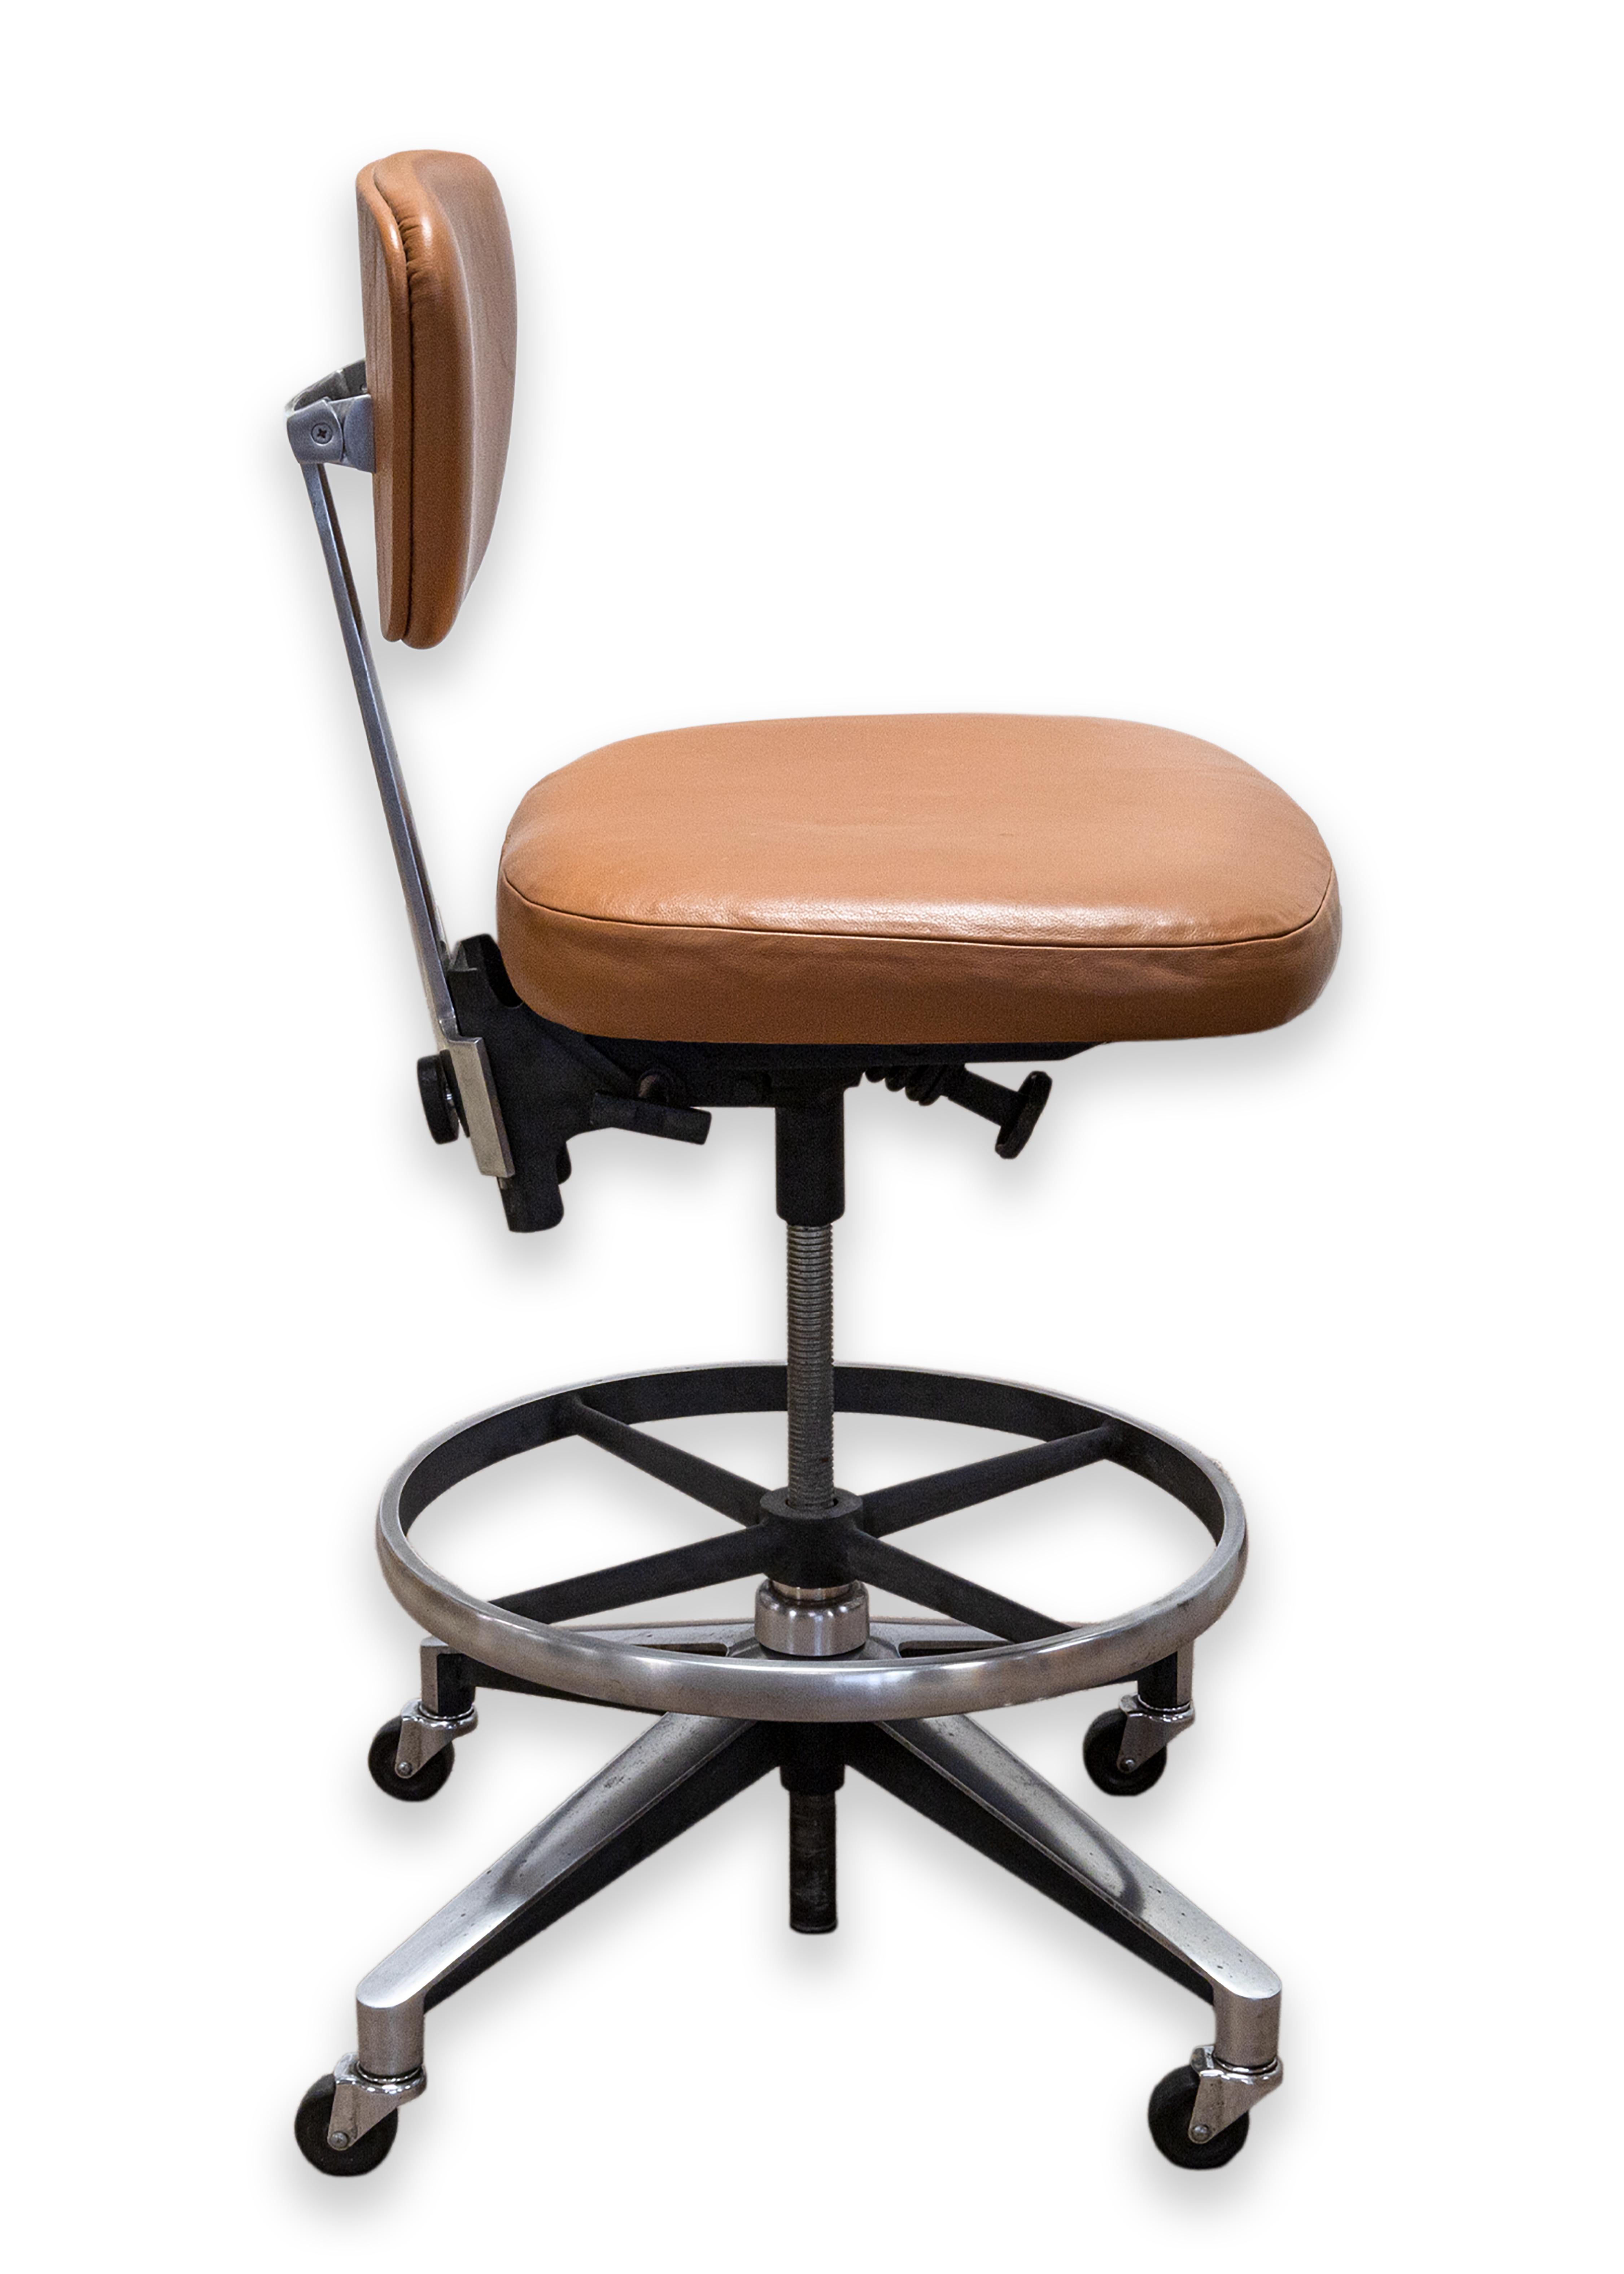 American Eero Saarinen for Knoll Drafting Stool Model 77 S of the 70 Series OG Leather For Sale